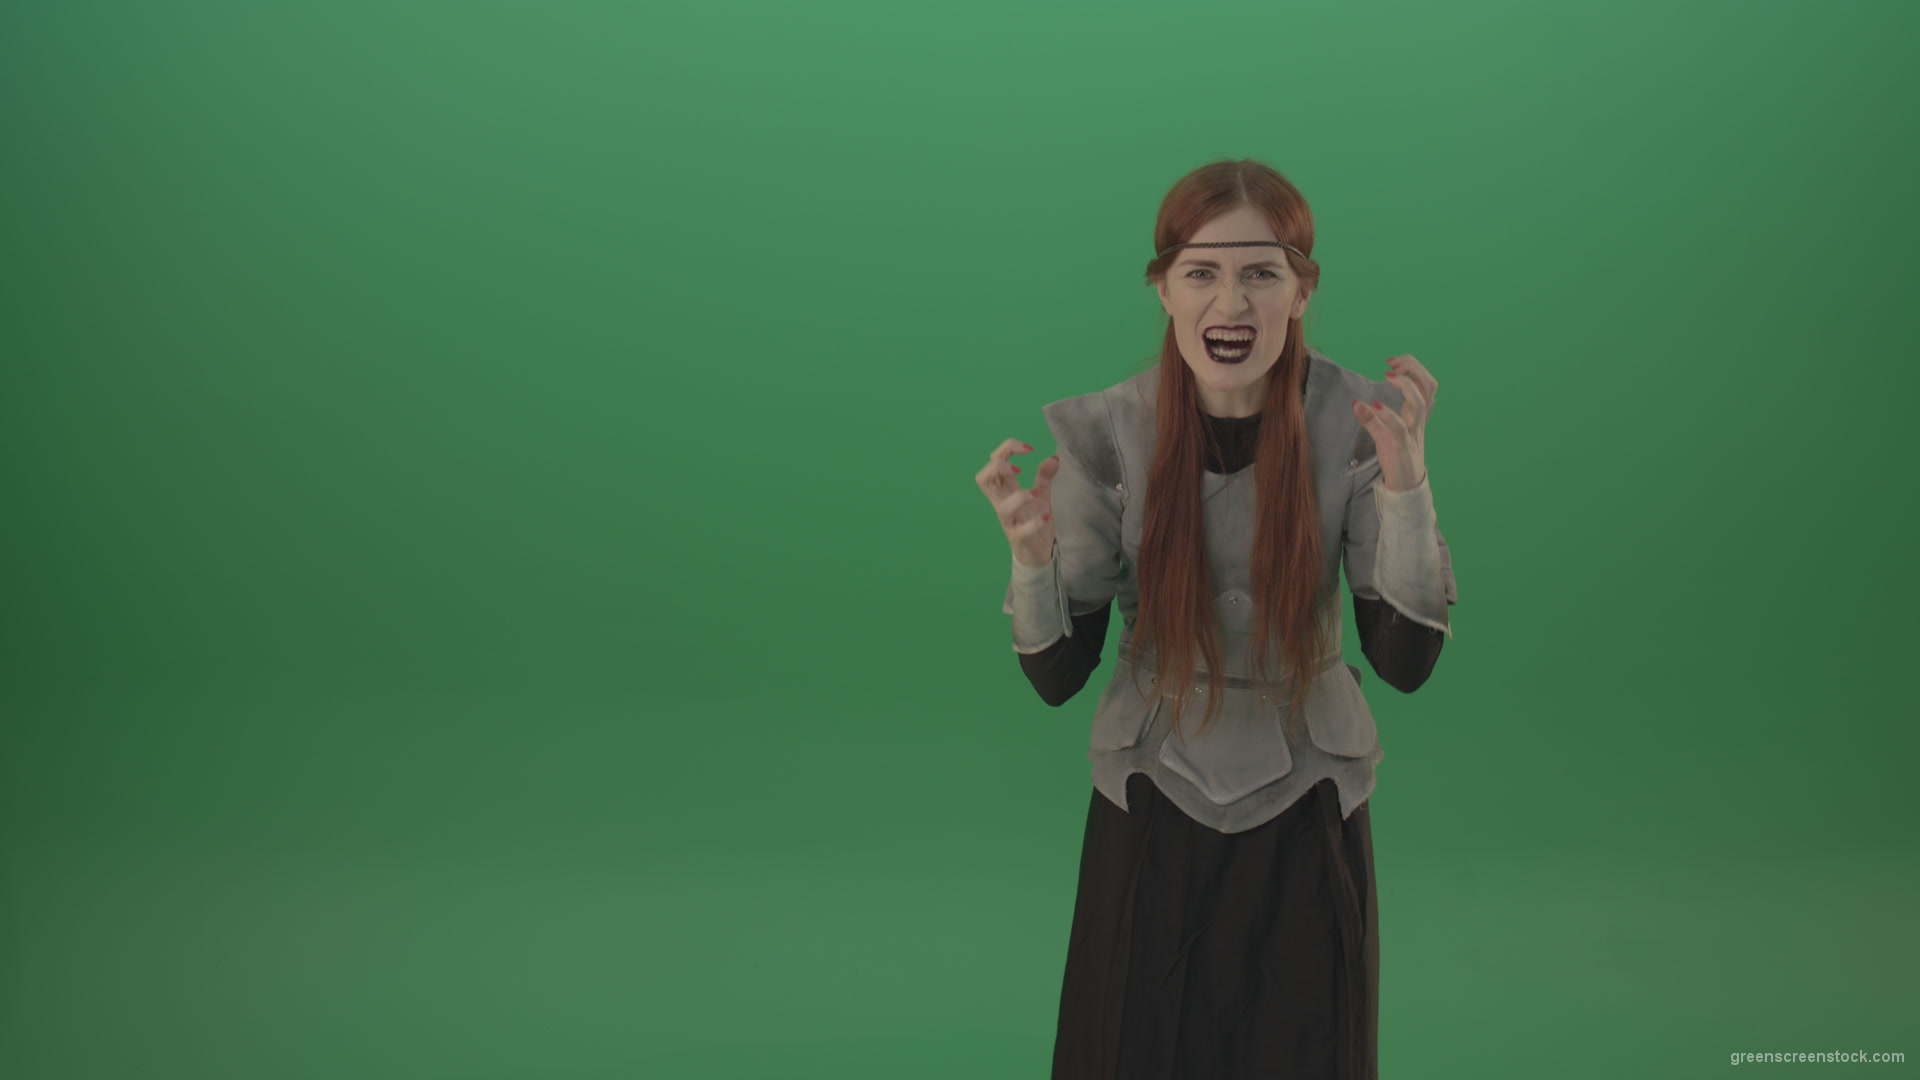 Witch-girl-watched-and-screamed-at-the-camera-with-green-eyes-on-a-green-background_009 Green Screen Stock